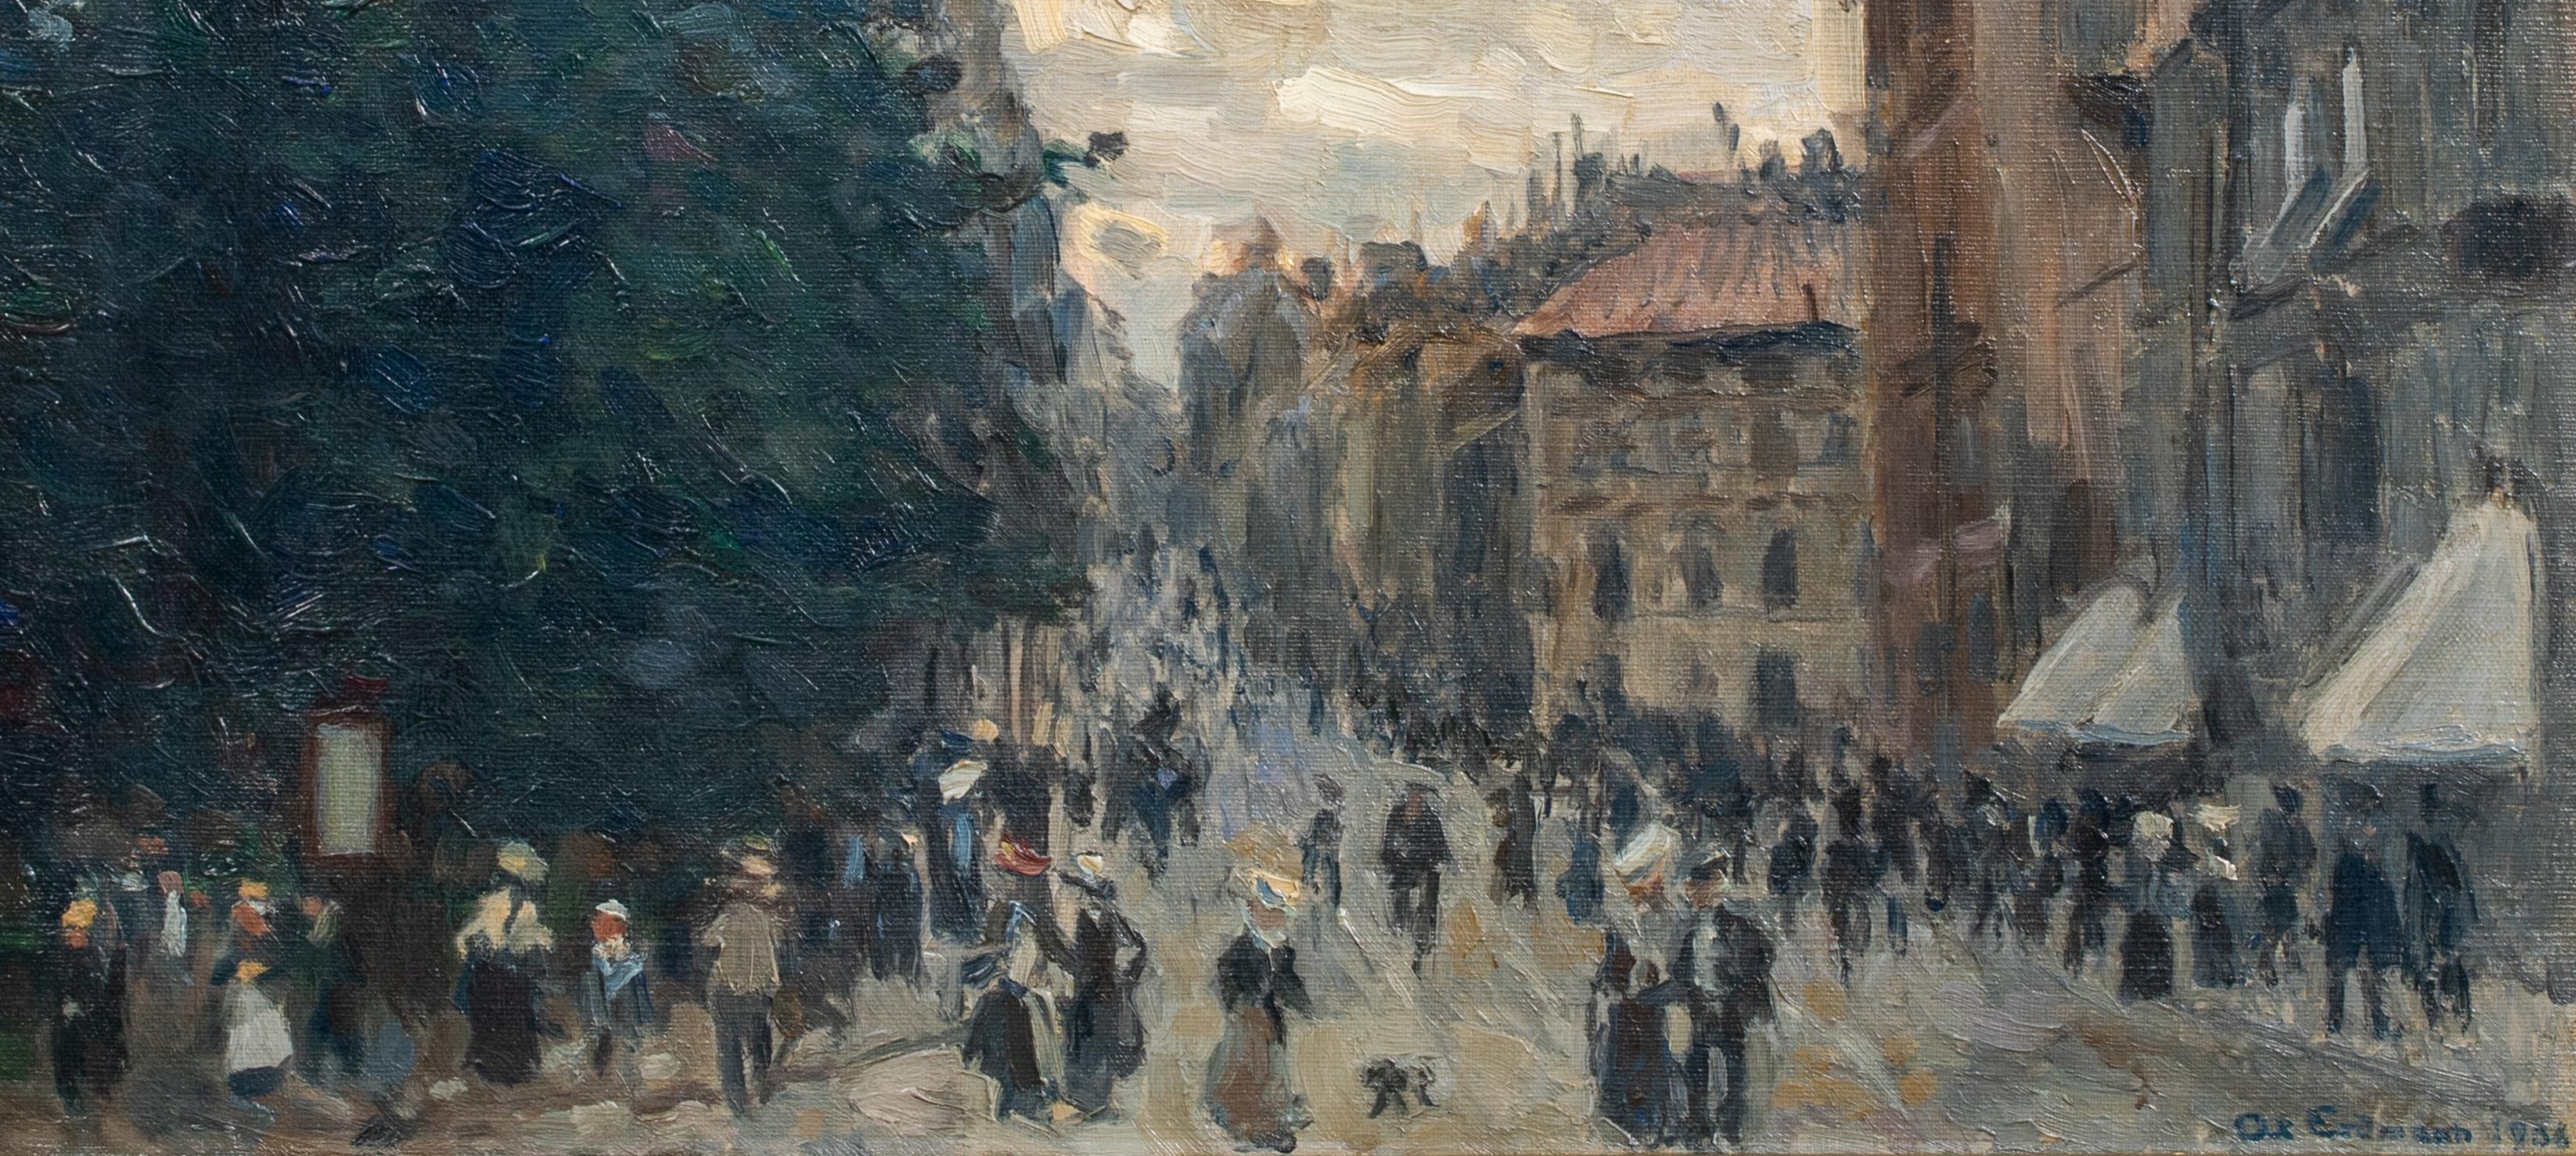 Street Scene, Stockholm, Sweden, circa 1900

by Axel Erdmann (1873-1954)

Circa 1900 Swedish Impressionist Street Scene of figures in a busy Stockholm street, oil on canvas by Axel Erdmann. Excellent quality and conditon example of both the famous